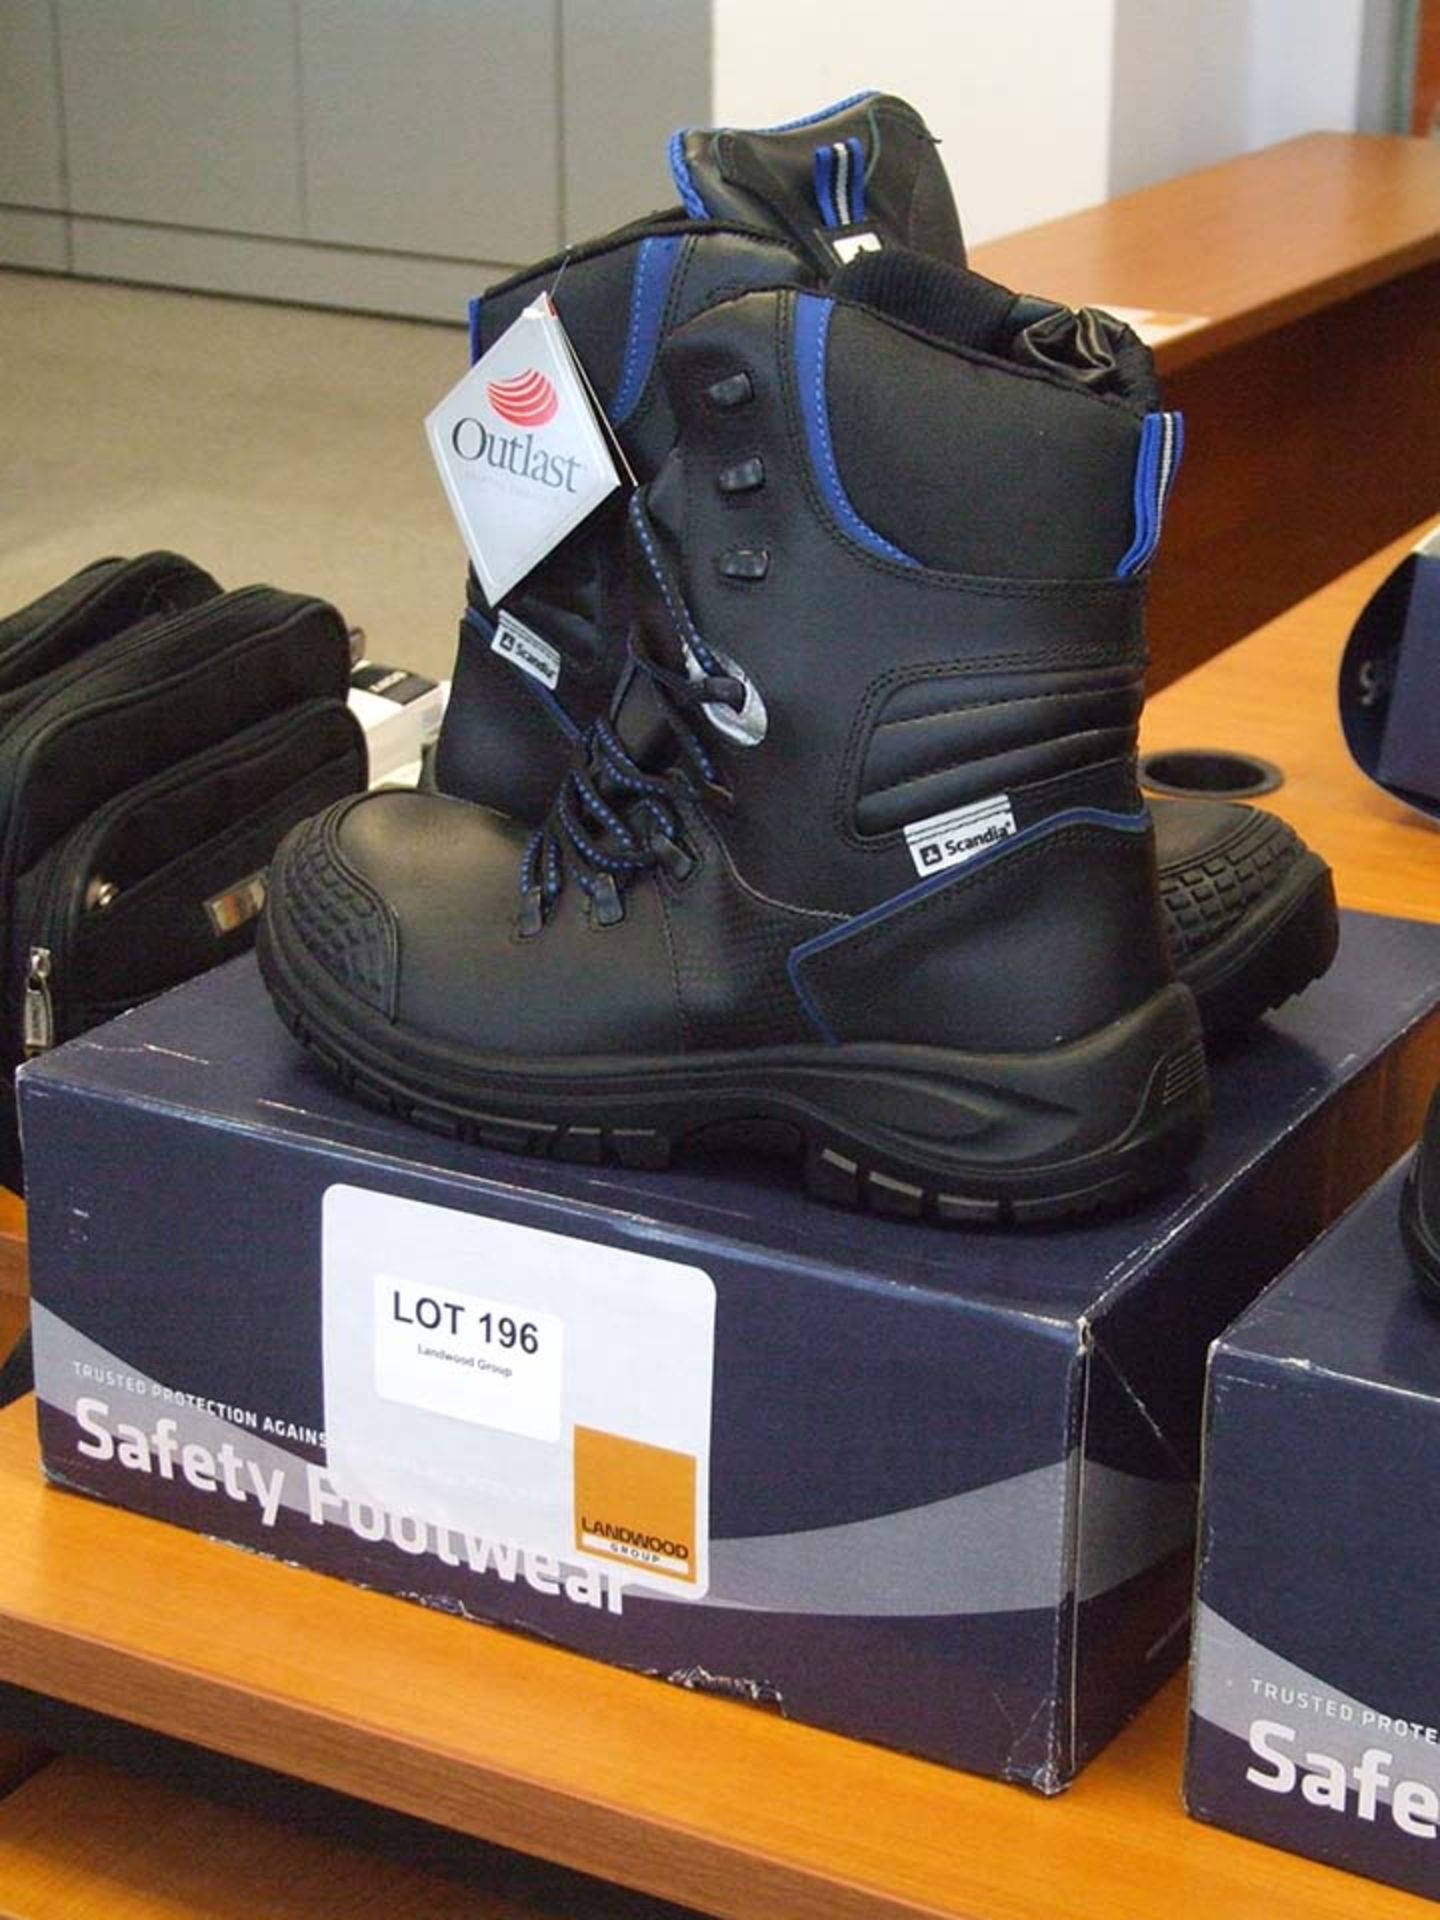 Pair of OUTLAST Black Size 10 Safety Boots in box